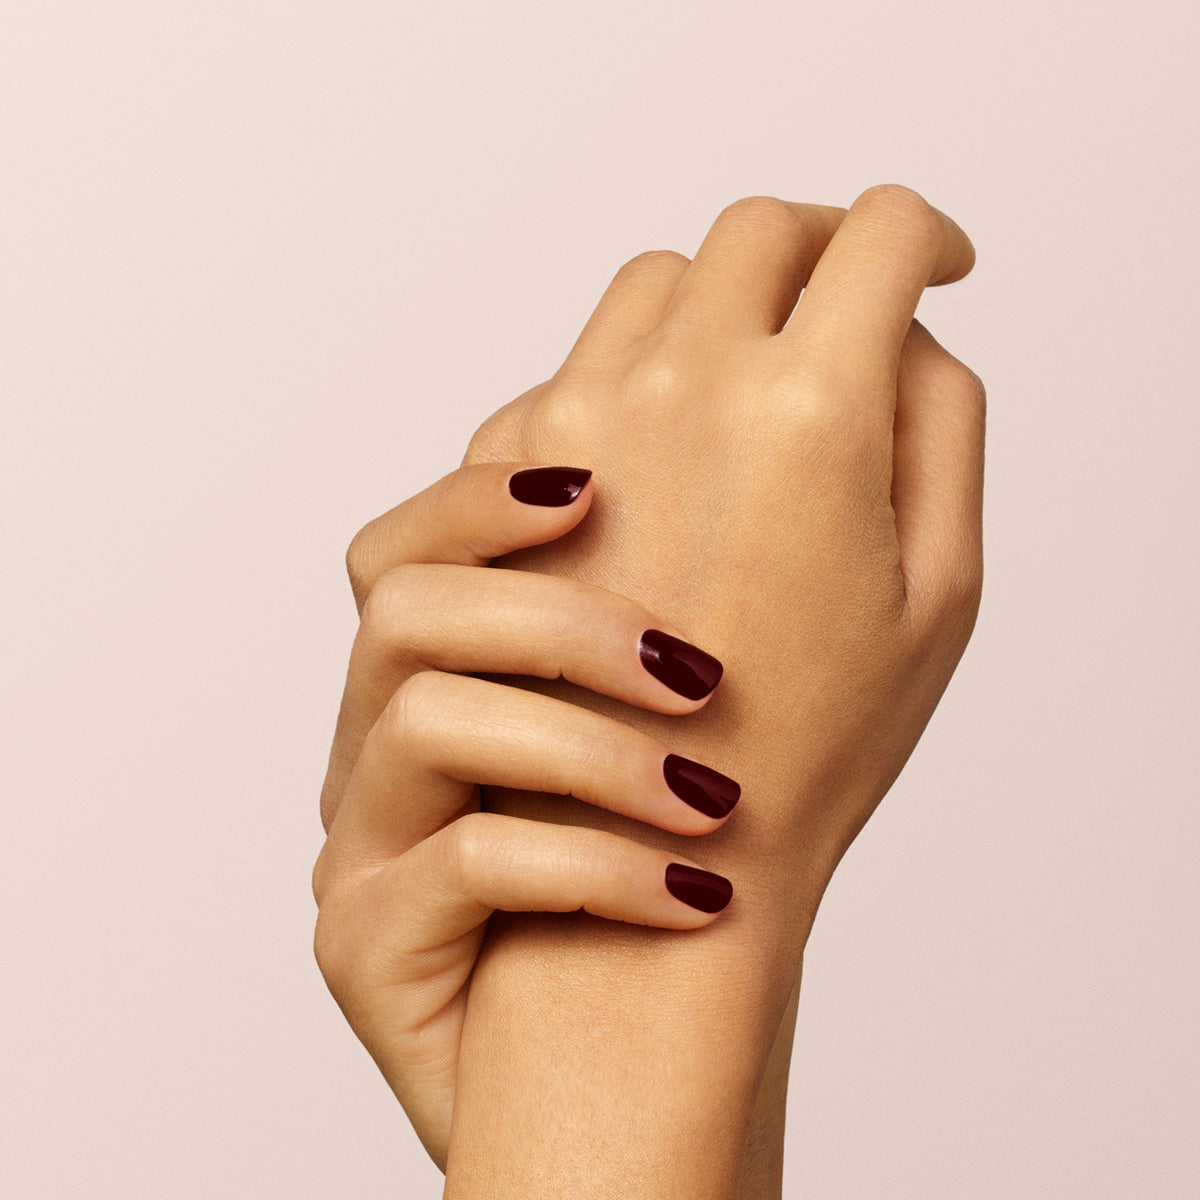 Burgundy Nail Designs You Need to Try This Season | ND Nails Supply